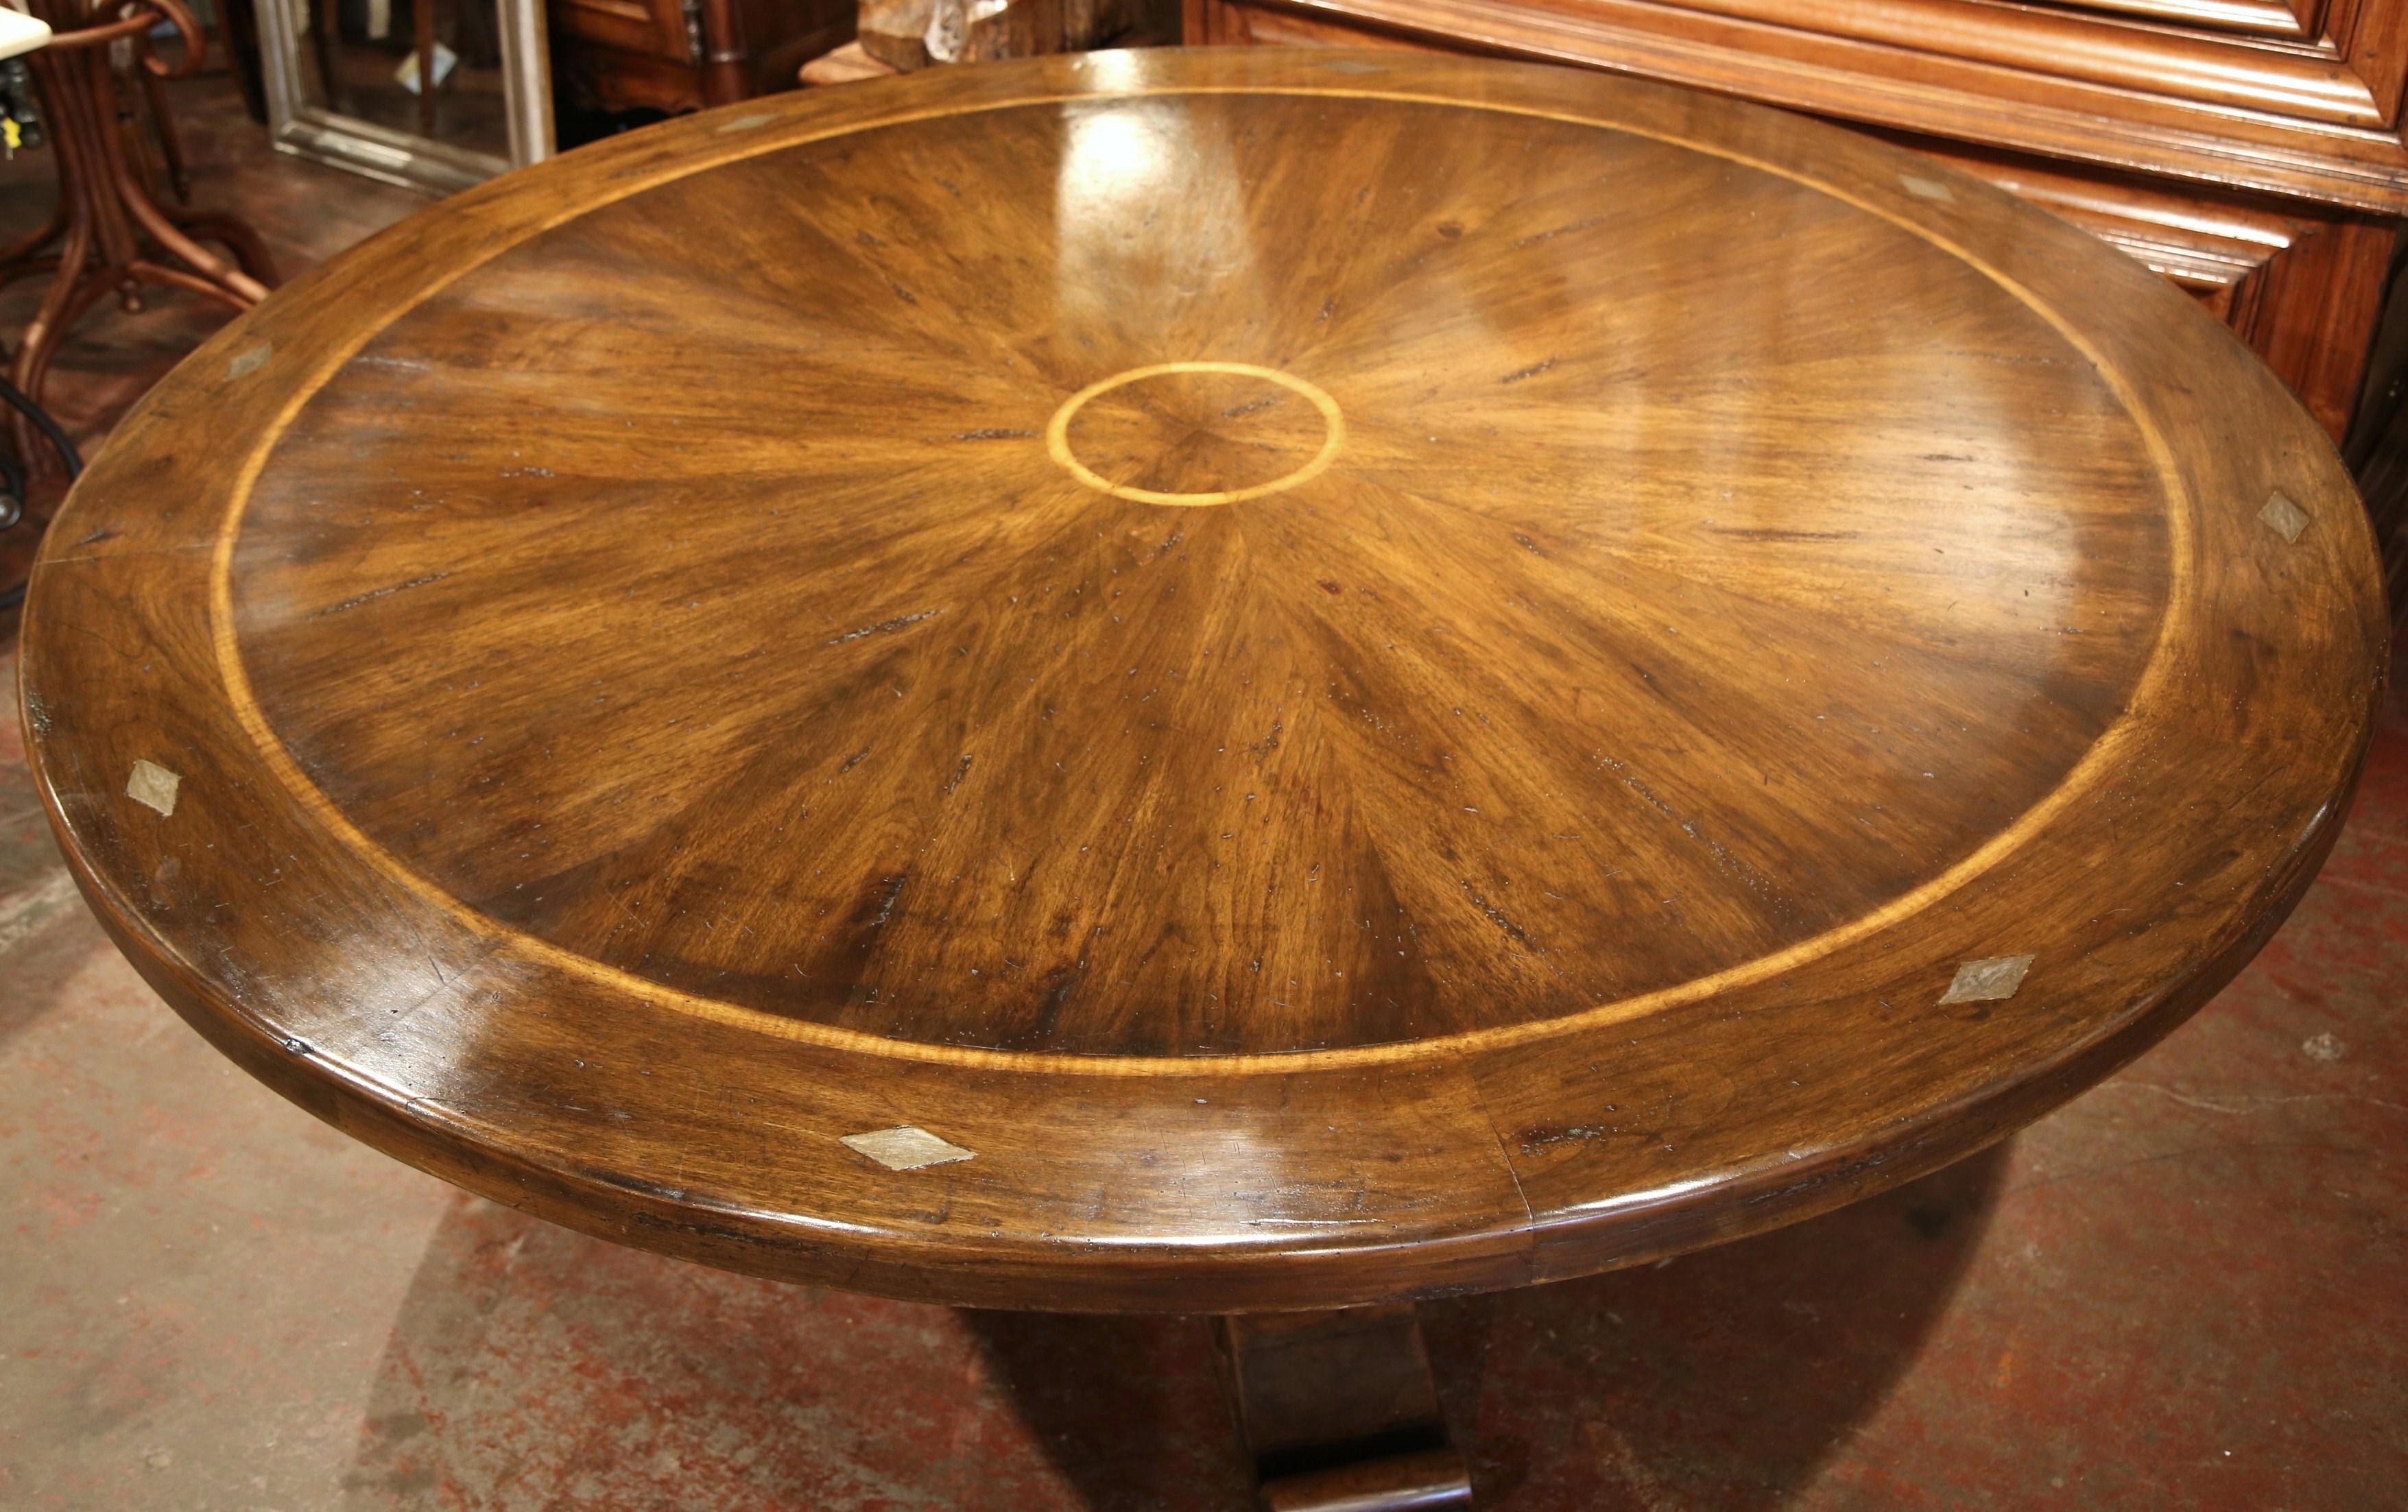 American Large Round Walnut Table with Carved Center Pedestal and Geometric Design